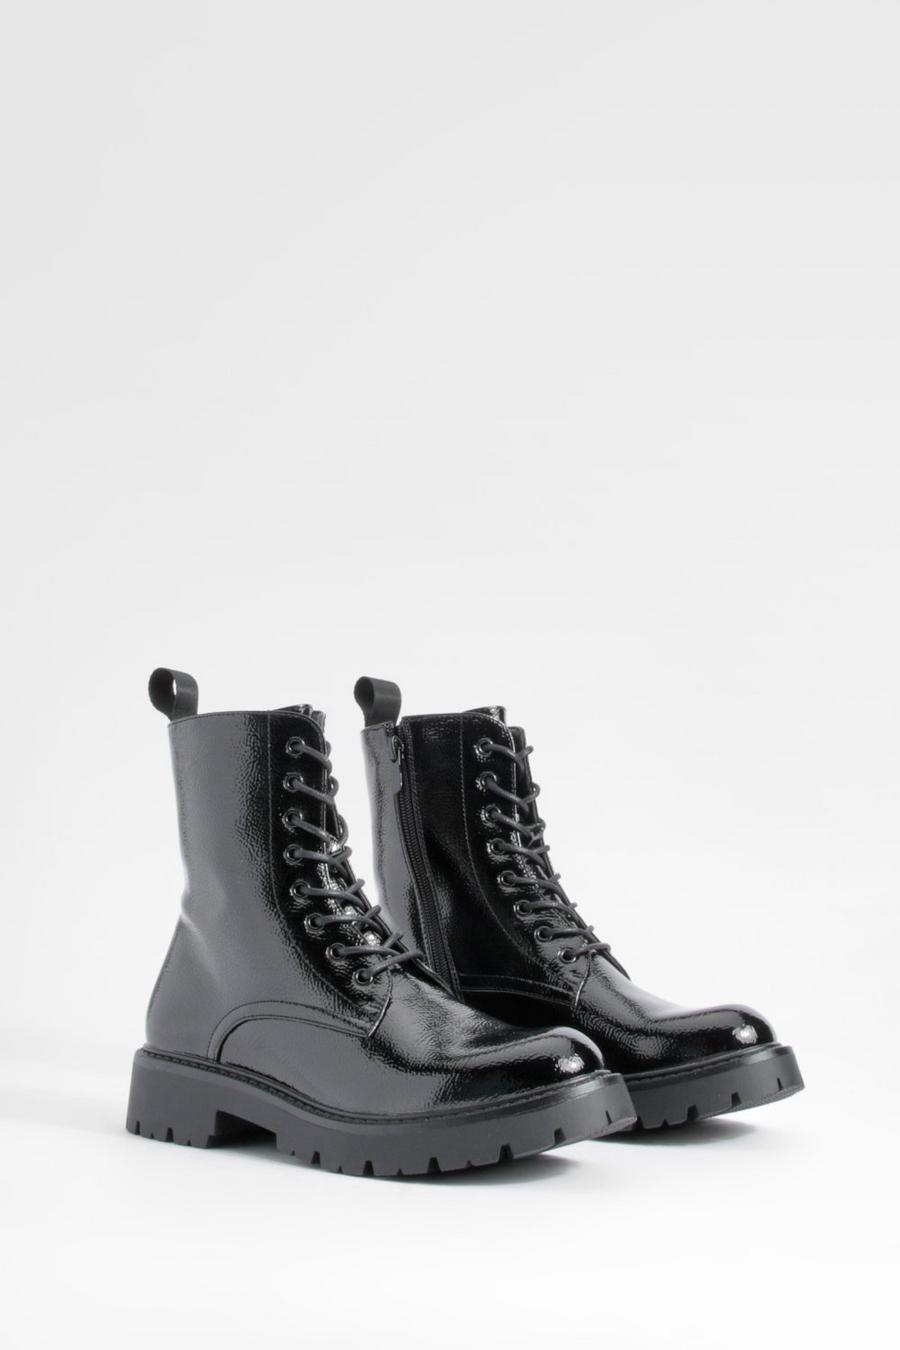 Black Chunky Patent Lace Up Hiker Boots    